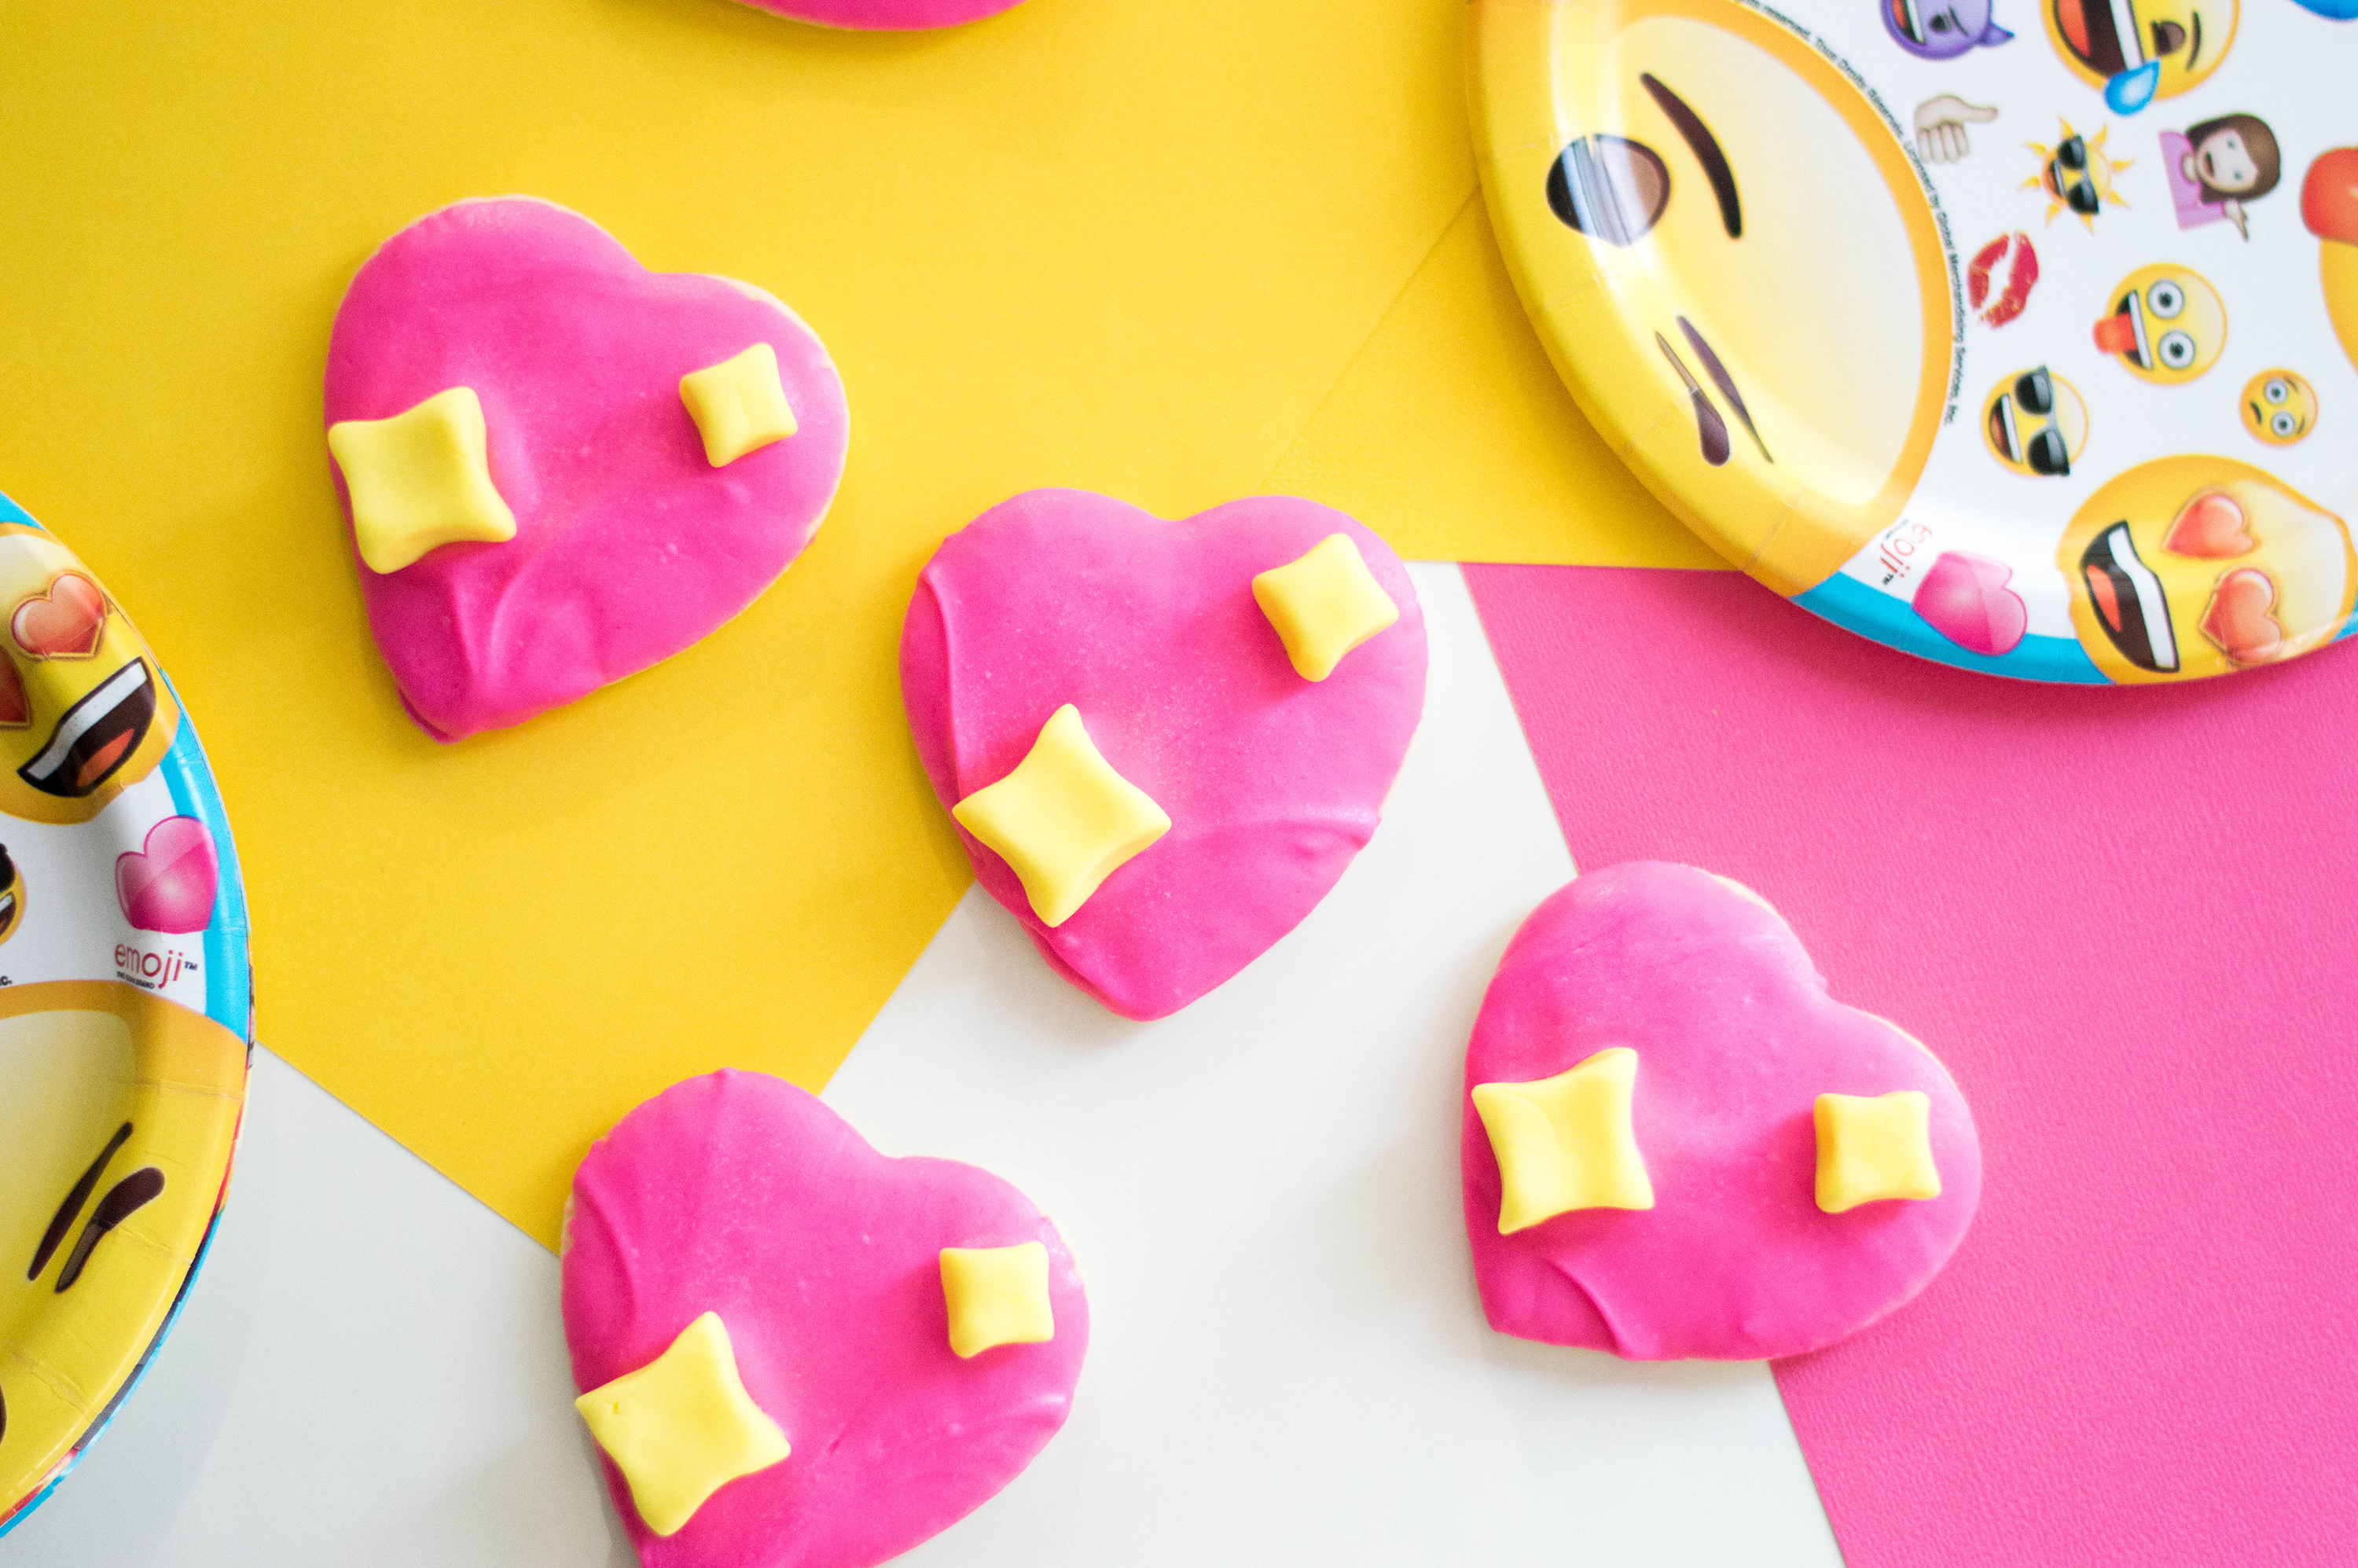 Gimme all the heart eyes with these emoji cookies.